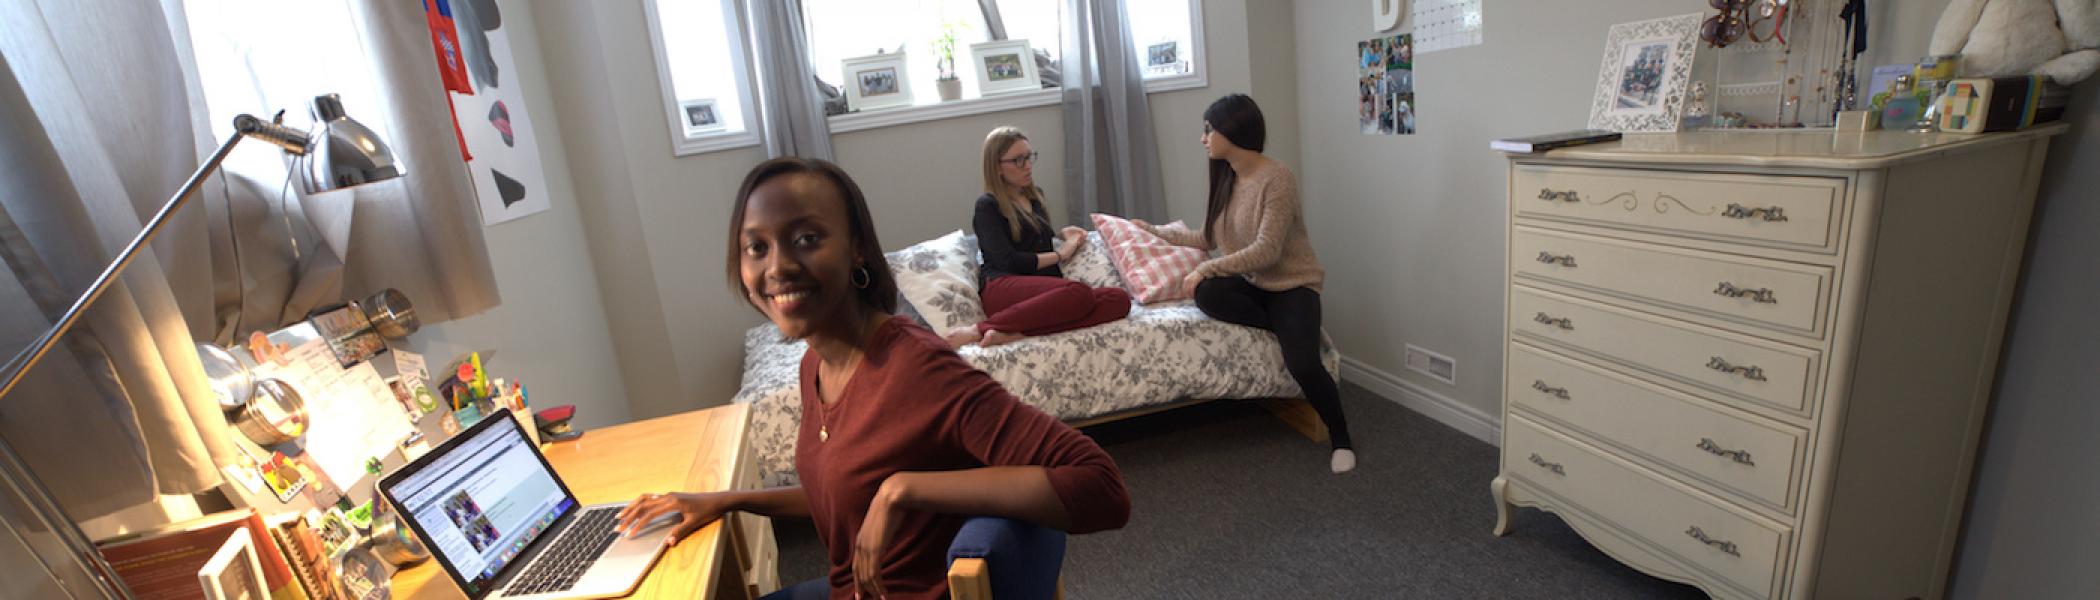 A girl sitting at her desk in her dorm room smiling with two girls sitting on her bed